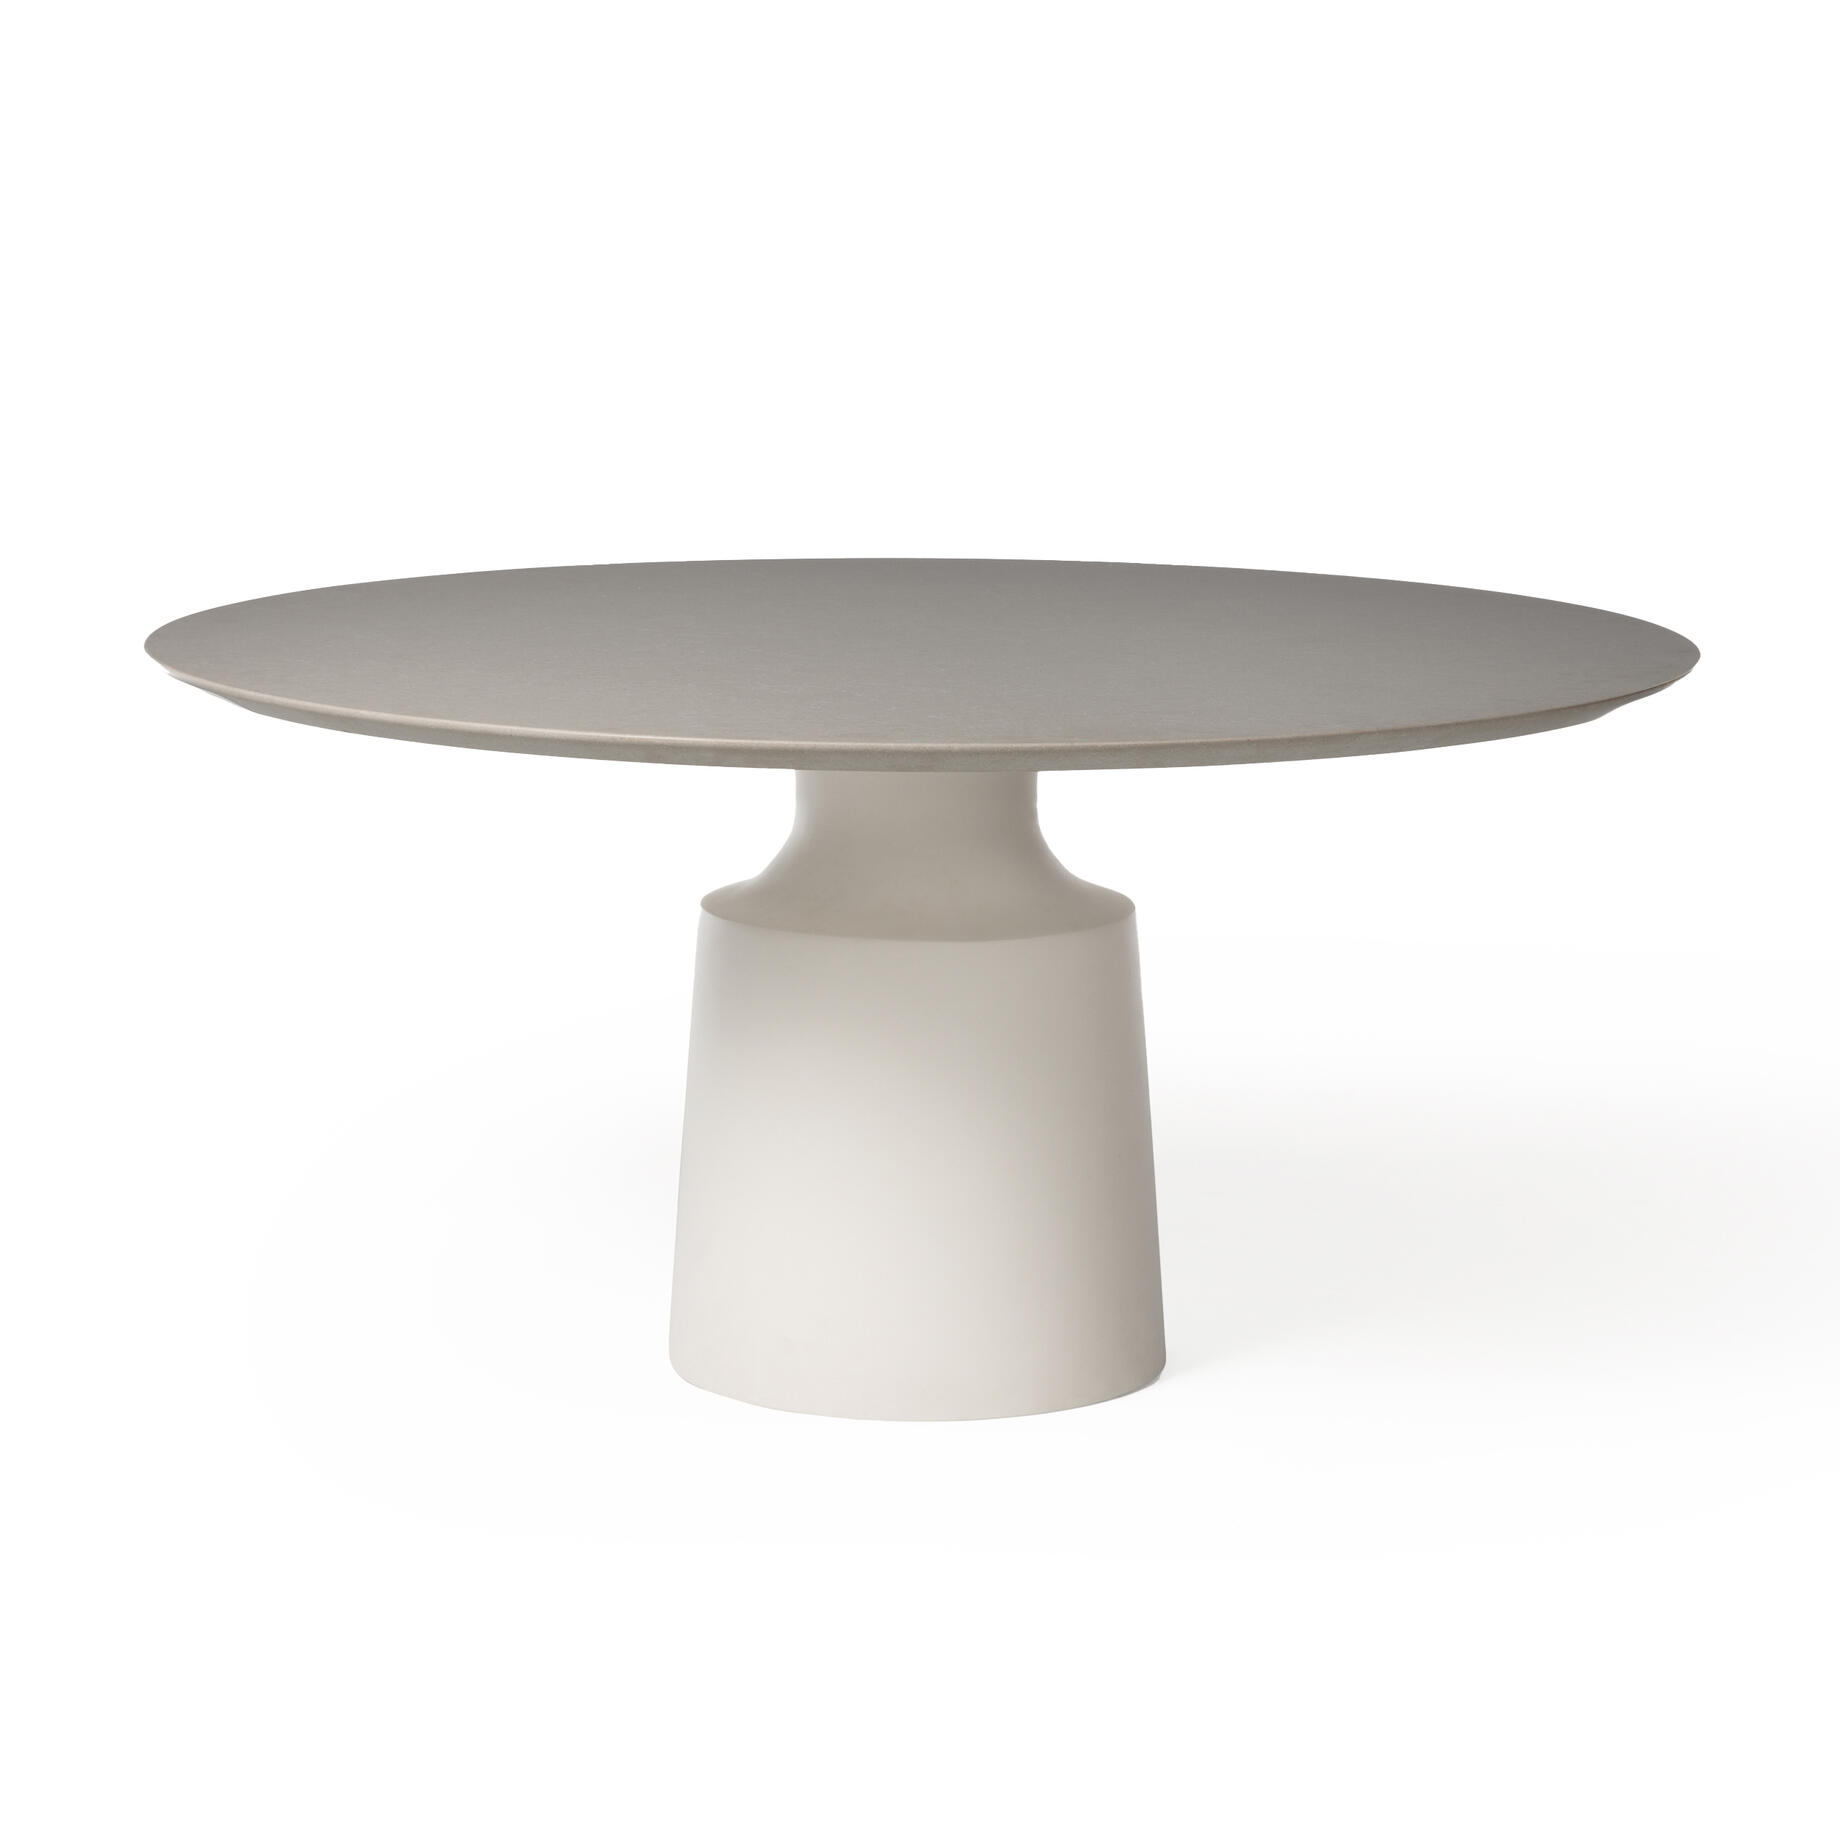 Peso Dining Table - Outdoor | HOLLY HUNT